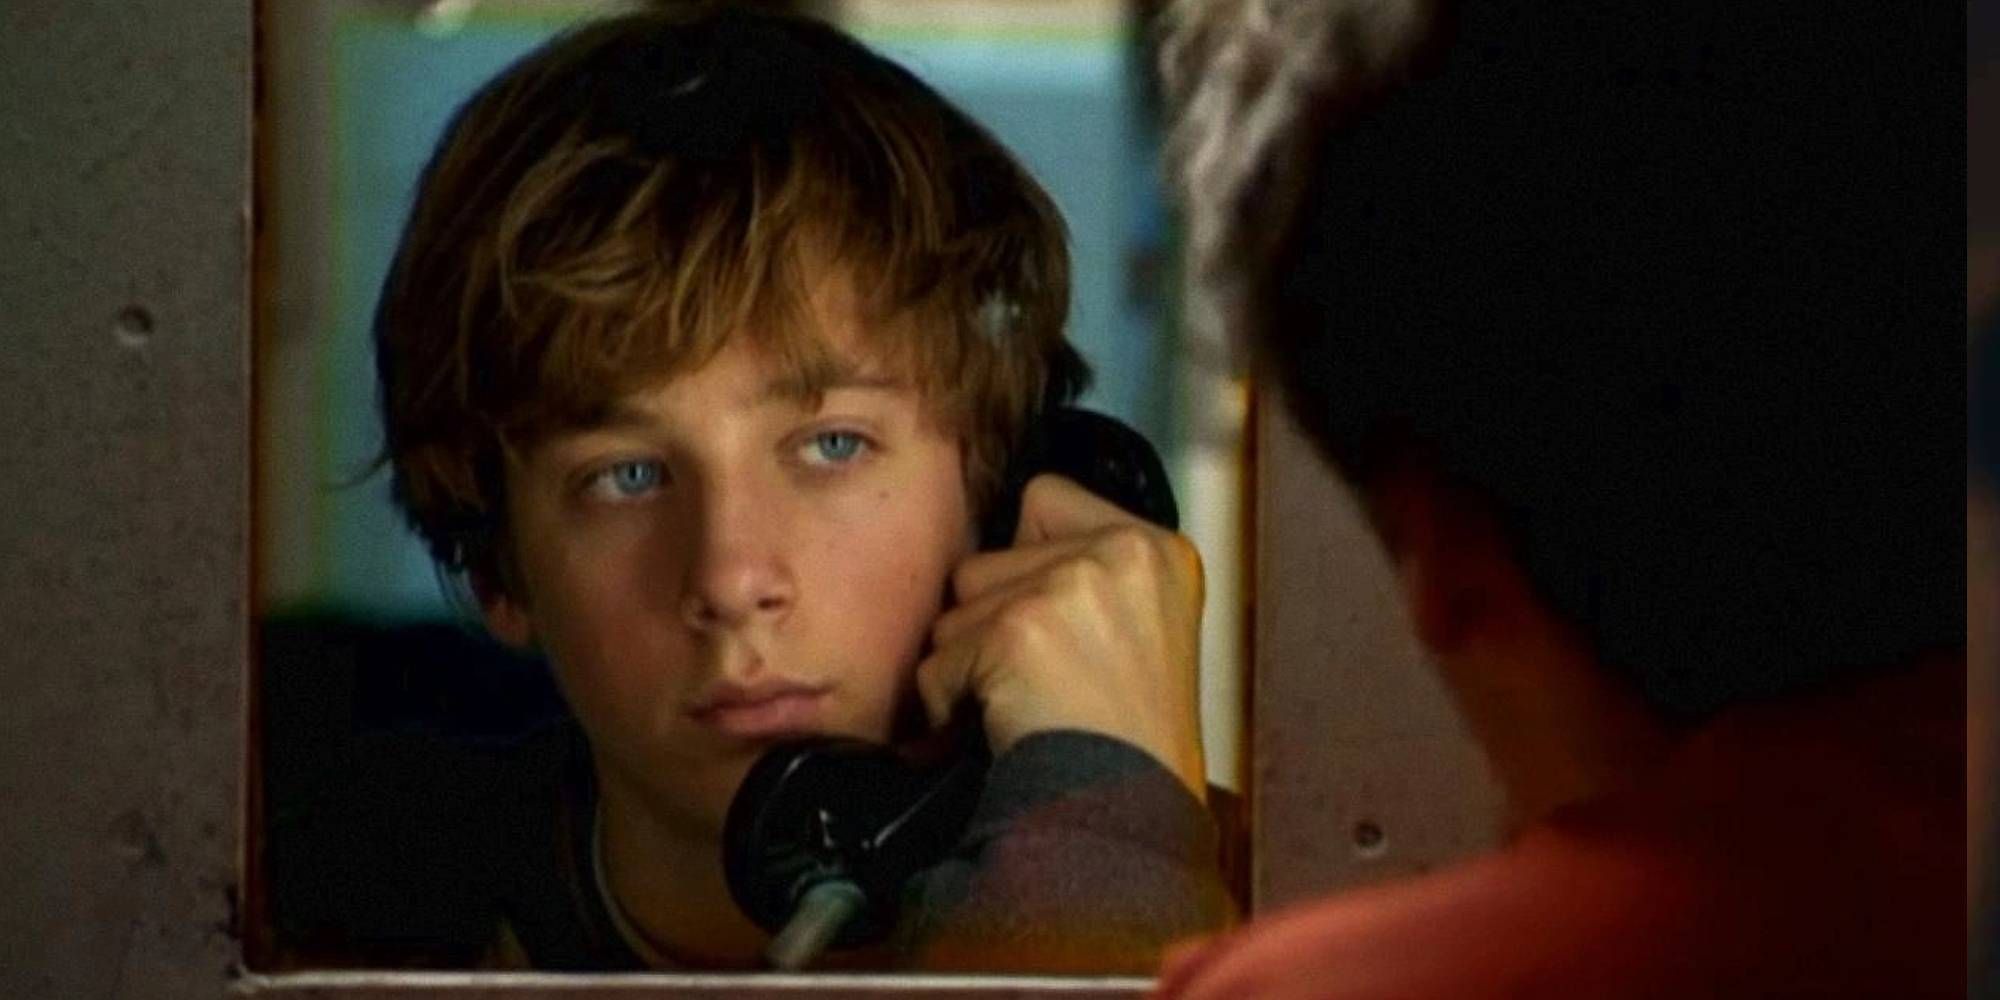 Jeremy Allen White on the phone in The Speed of Life